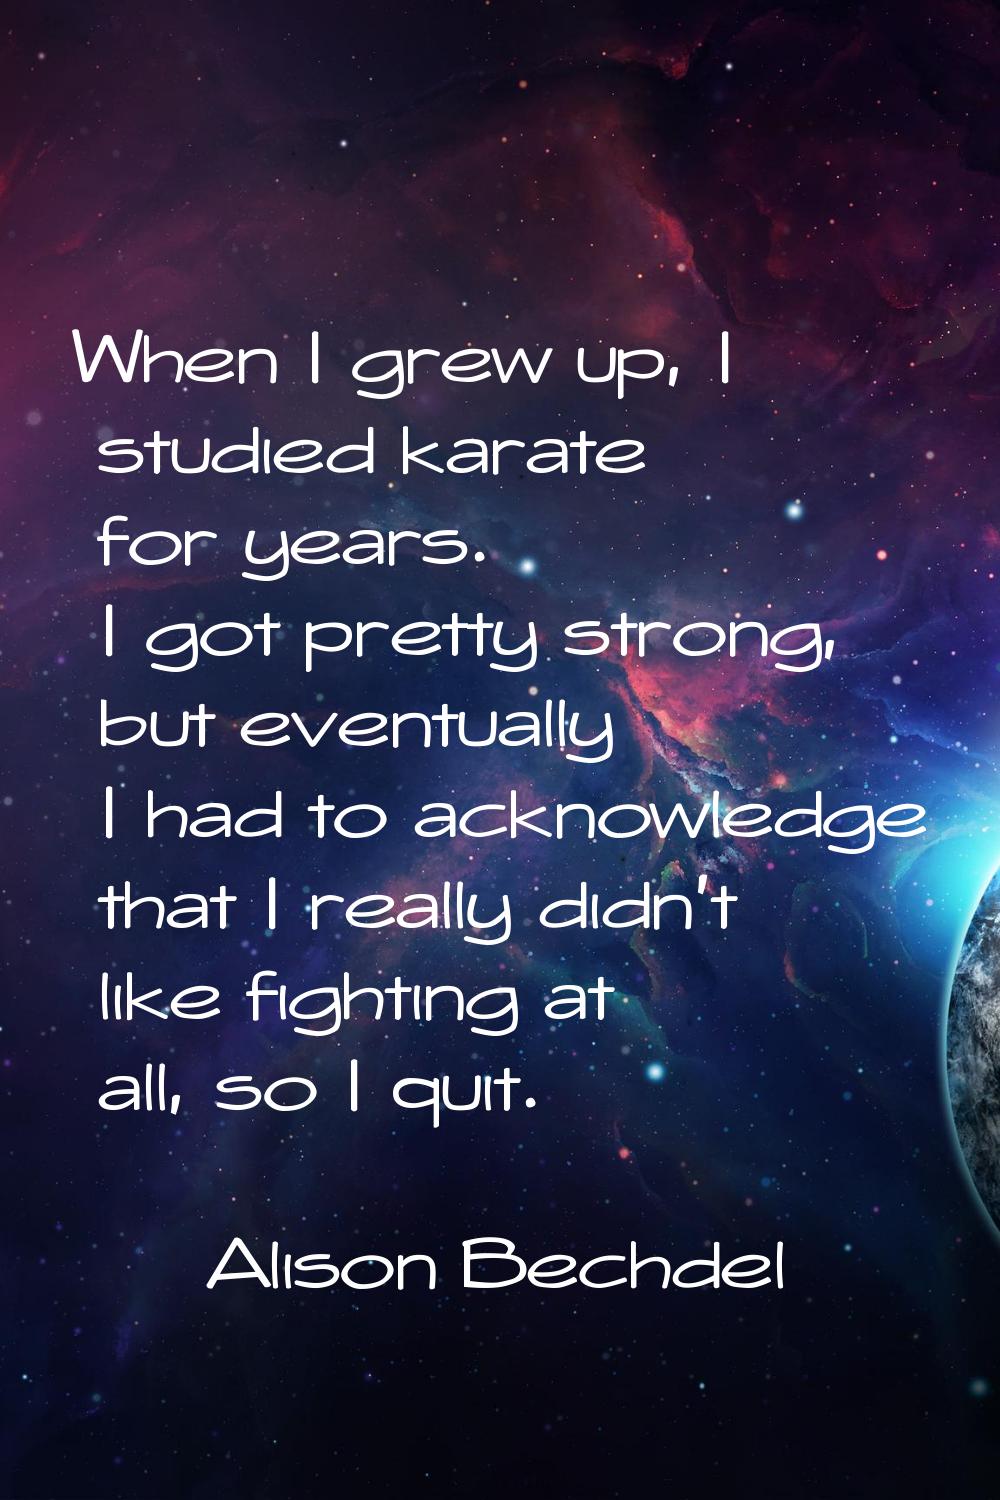 When I grew up, I studied karate for years. I got pretty strong, but eventually I had to acknowledg